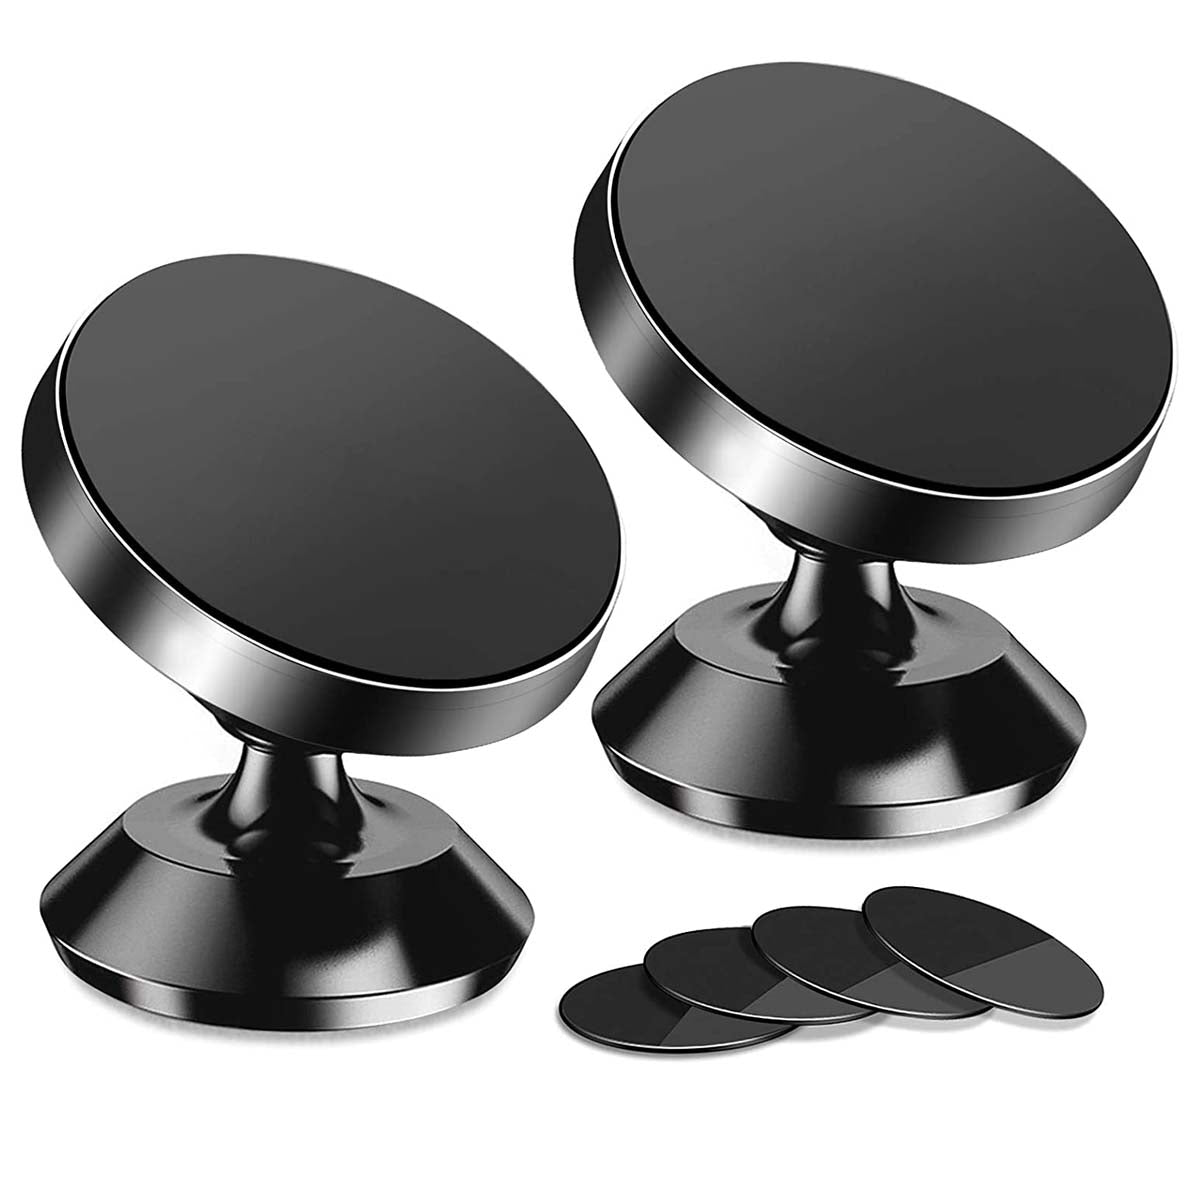 [2 Pack ] Magnetic Phone Mount, Custom For Cars, [ Super Strong Magnet ] [ with 4 Metal Plate ] car Magnetic Phone Holder, [ 360° Rotation ] Universal Dashboard car Mount Fits All Cell Phones, Car Accessories KO13982